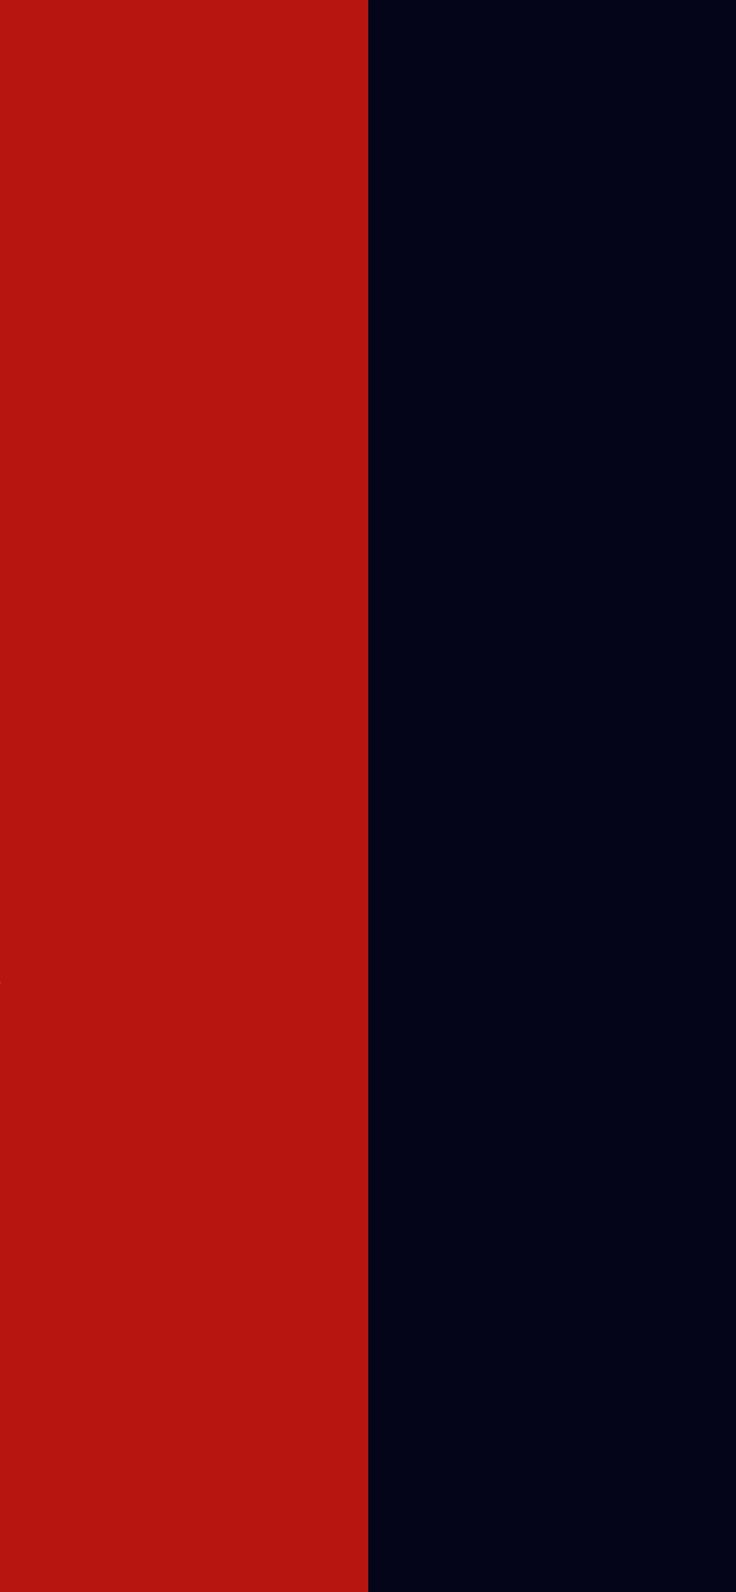 Red And Black. DUAL Central. Color wallpaper iphone, Phone wallpaper vintage, iPhone wallpaper image